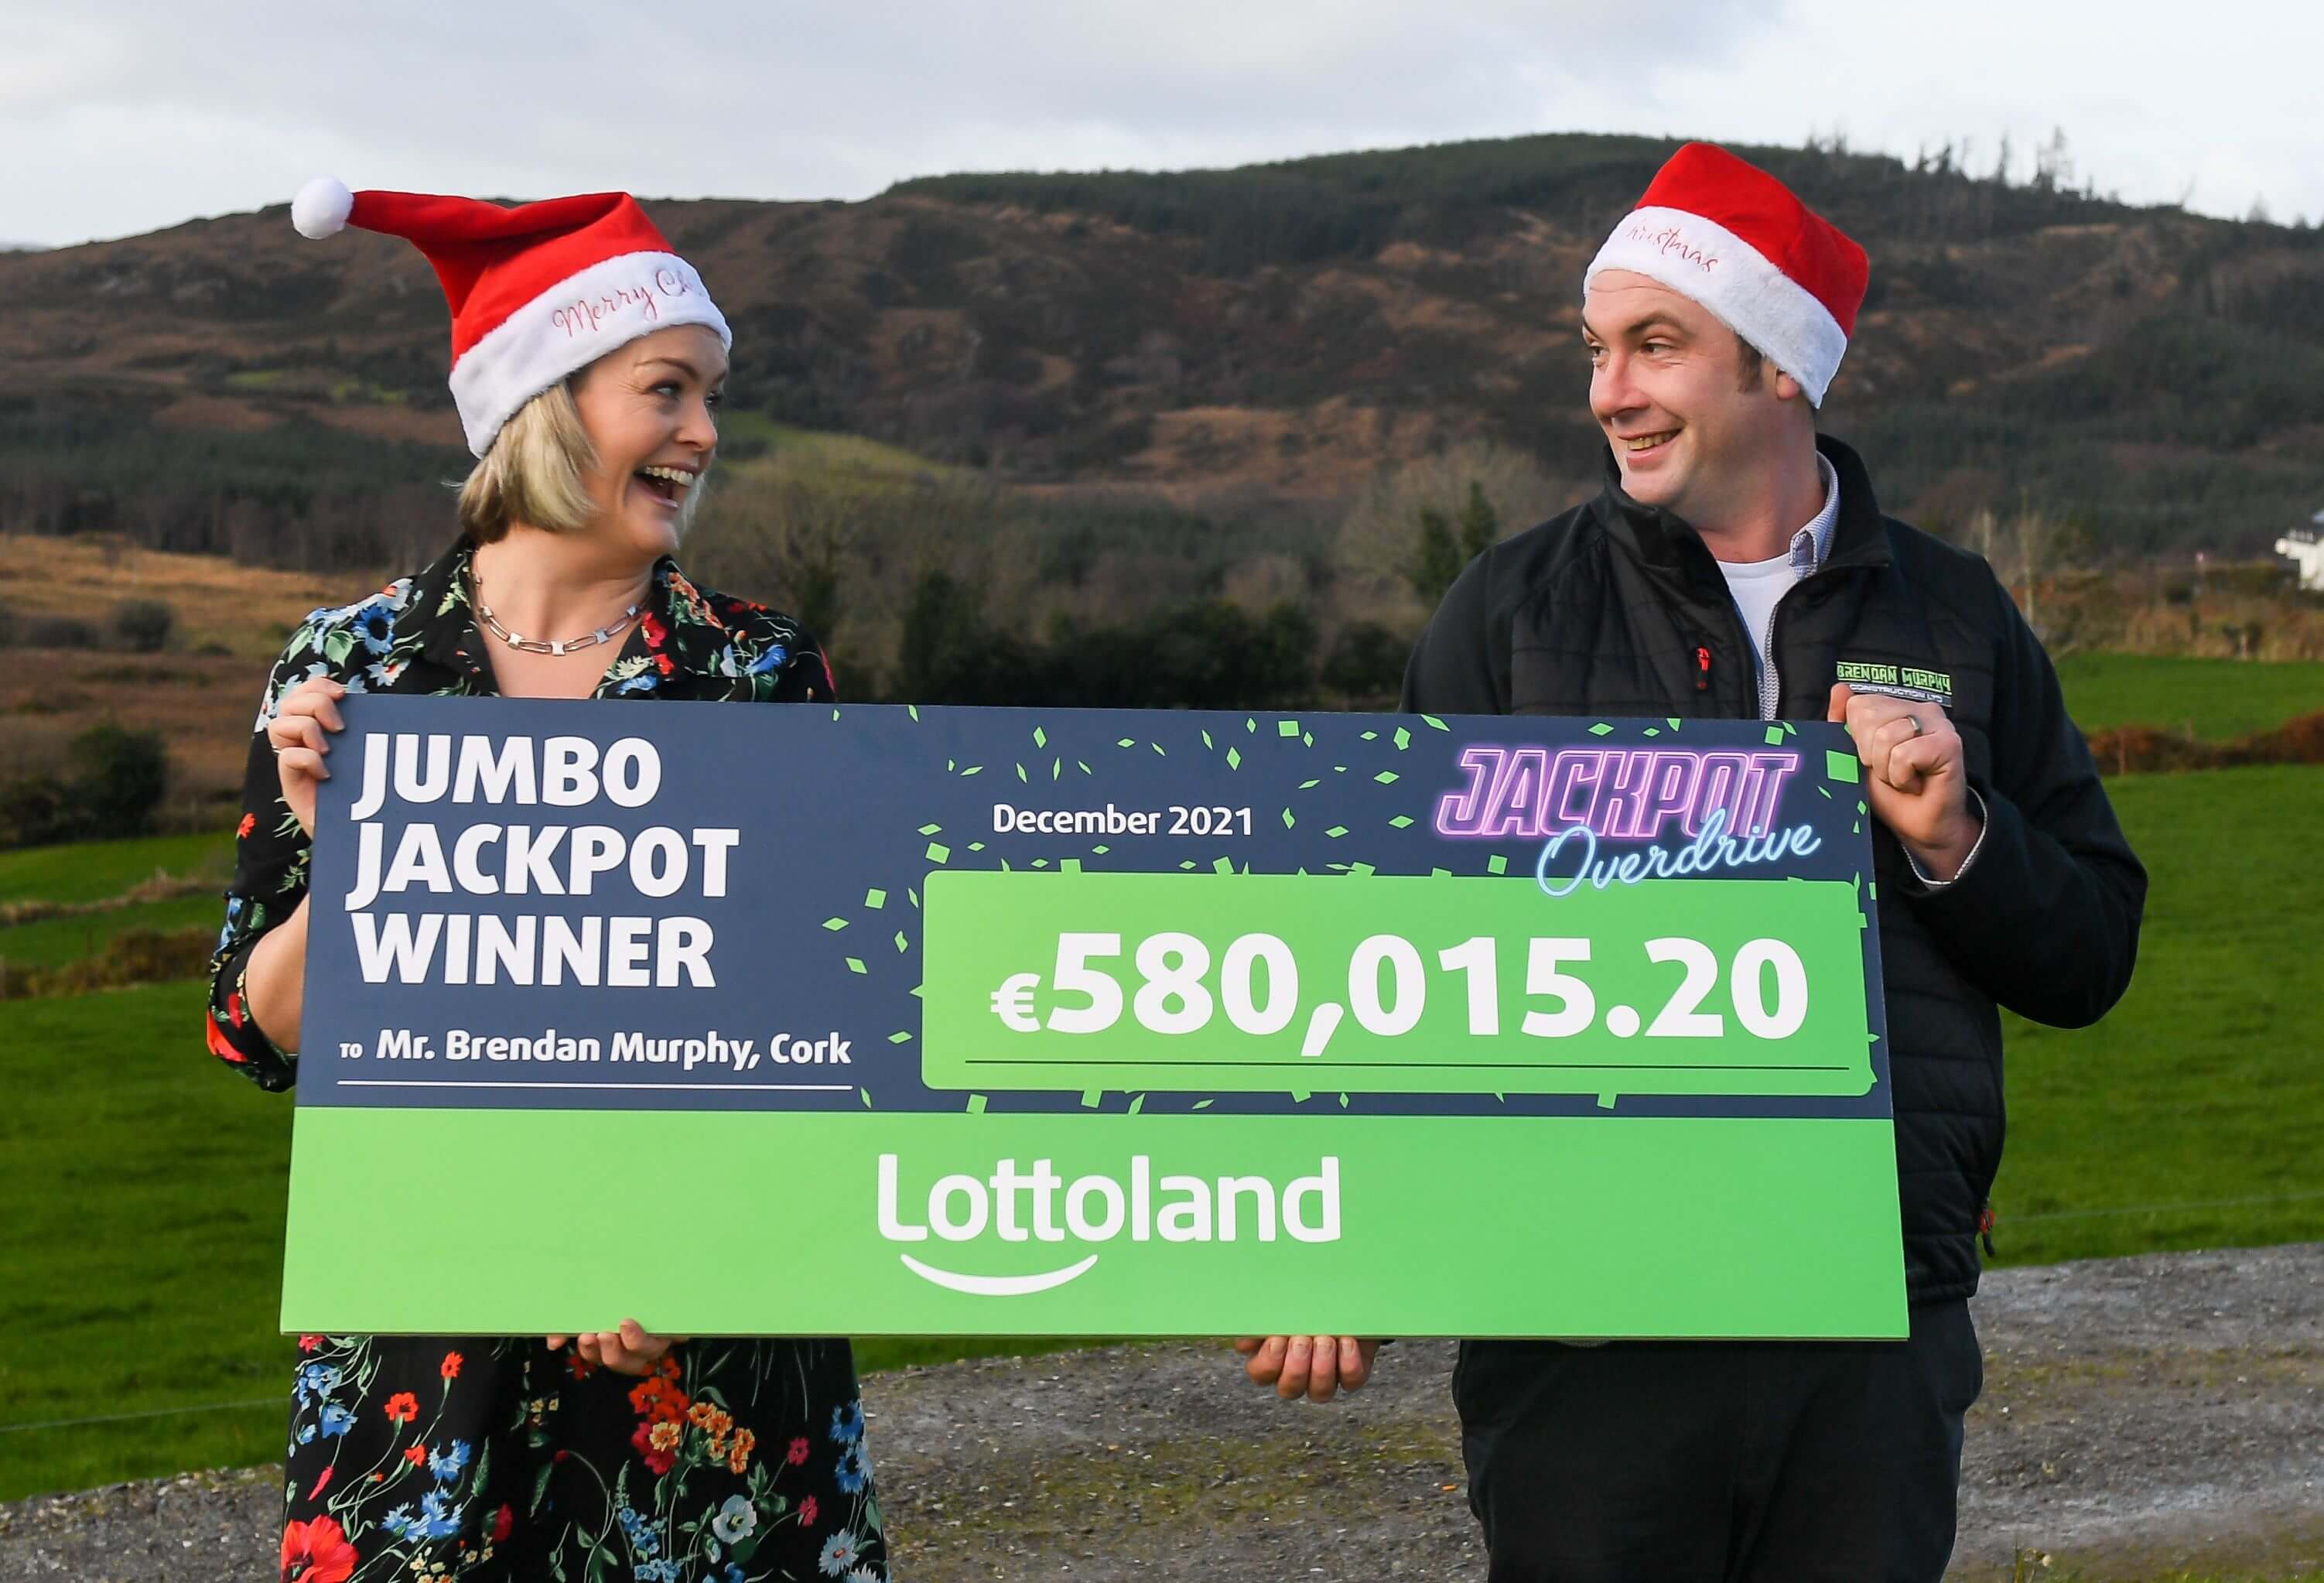 Lottoland winner holding up his cheque and smiling with his wife after winning the jackpot wearing Christmas hats to celebrate